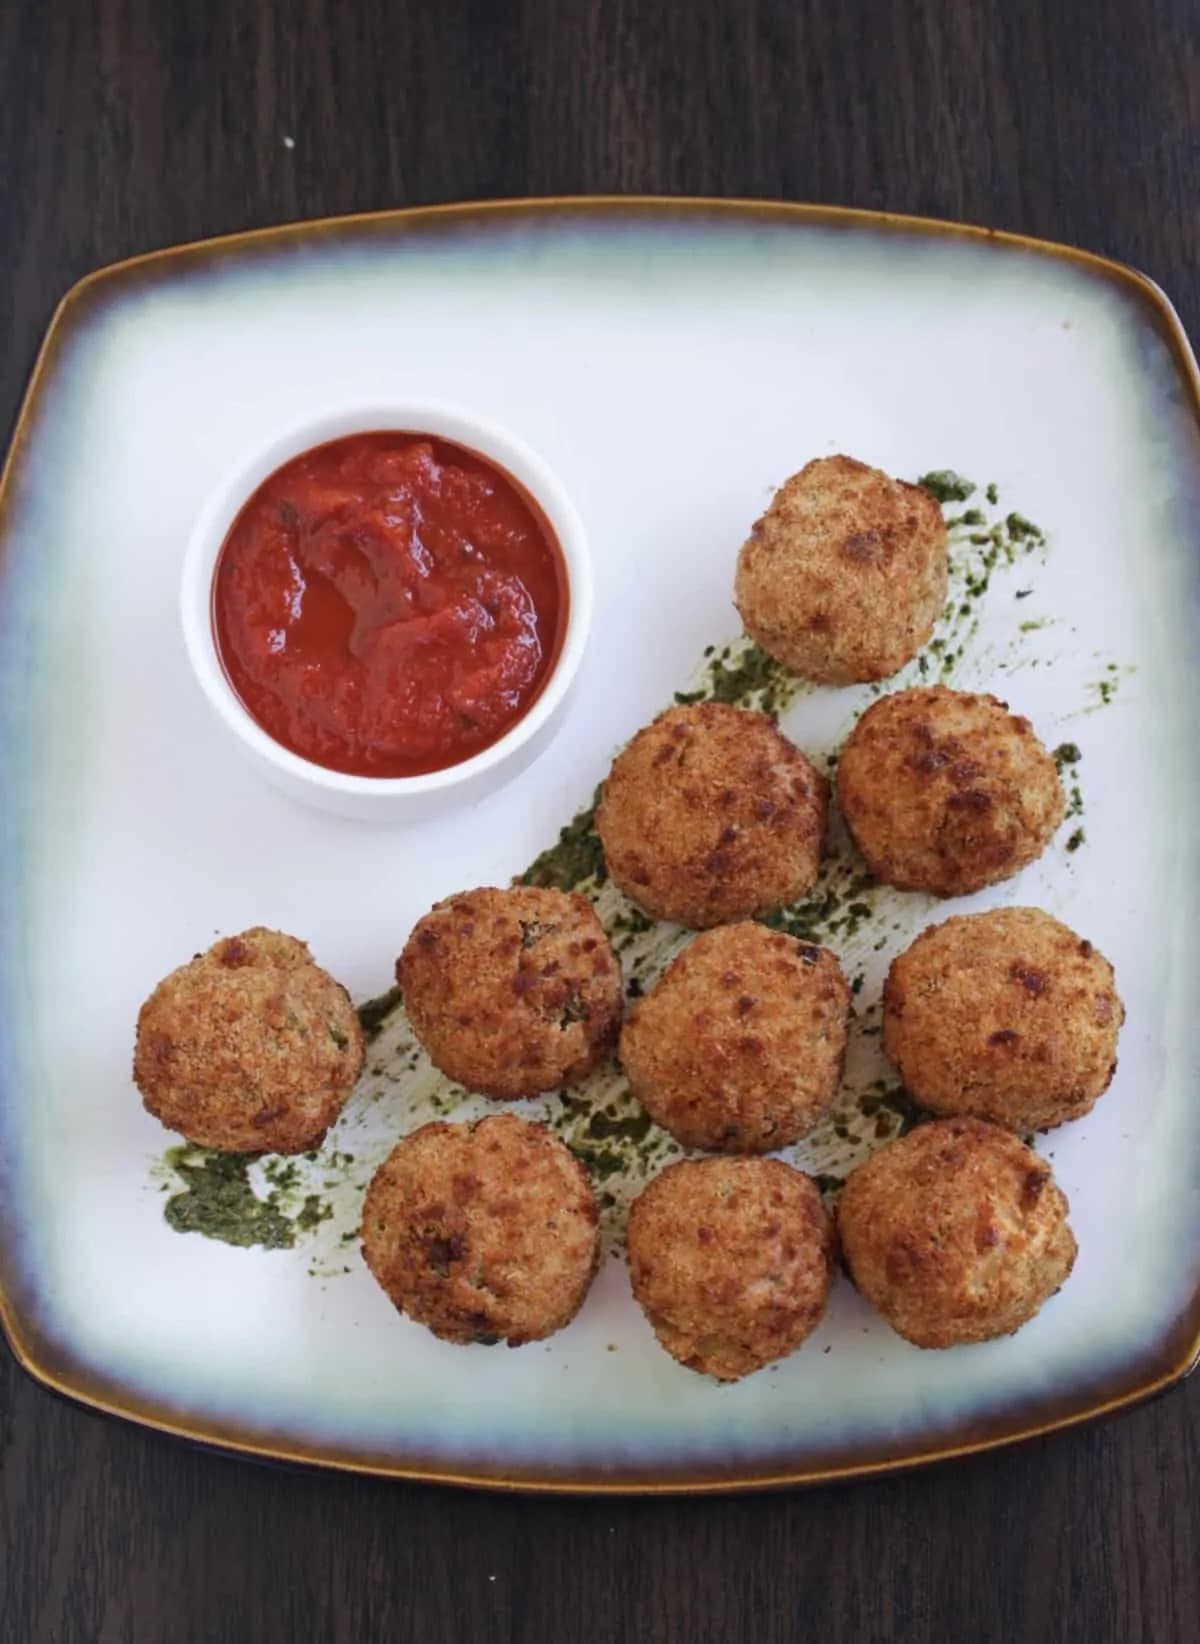 Homemade Air Fryer Arancini (Rice Balls) on a plate and a bowl of ketchup